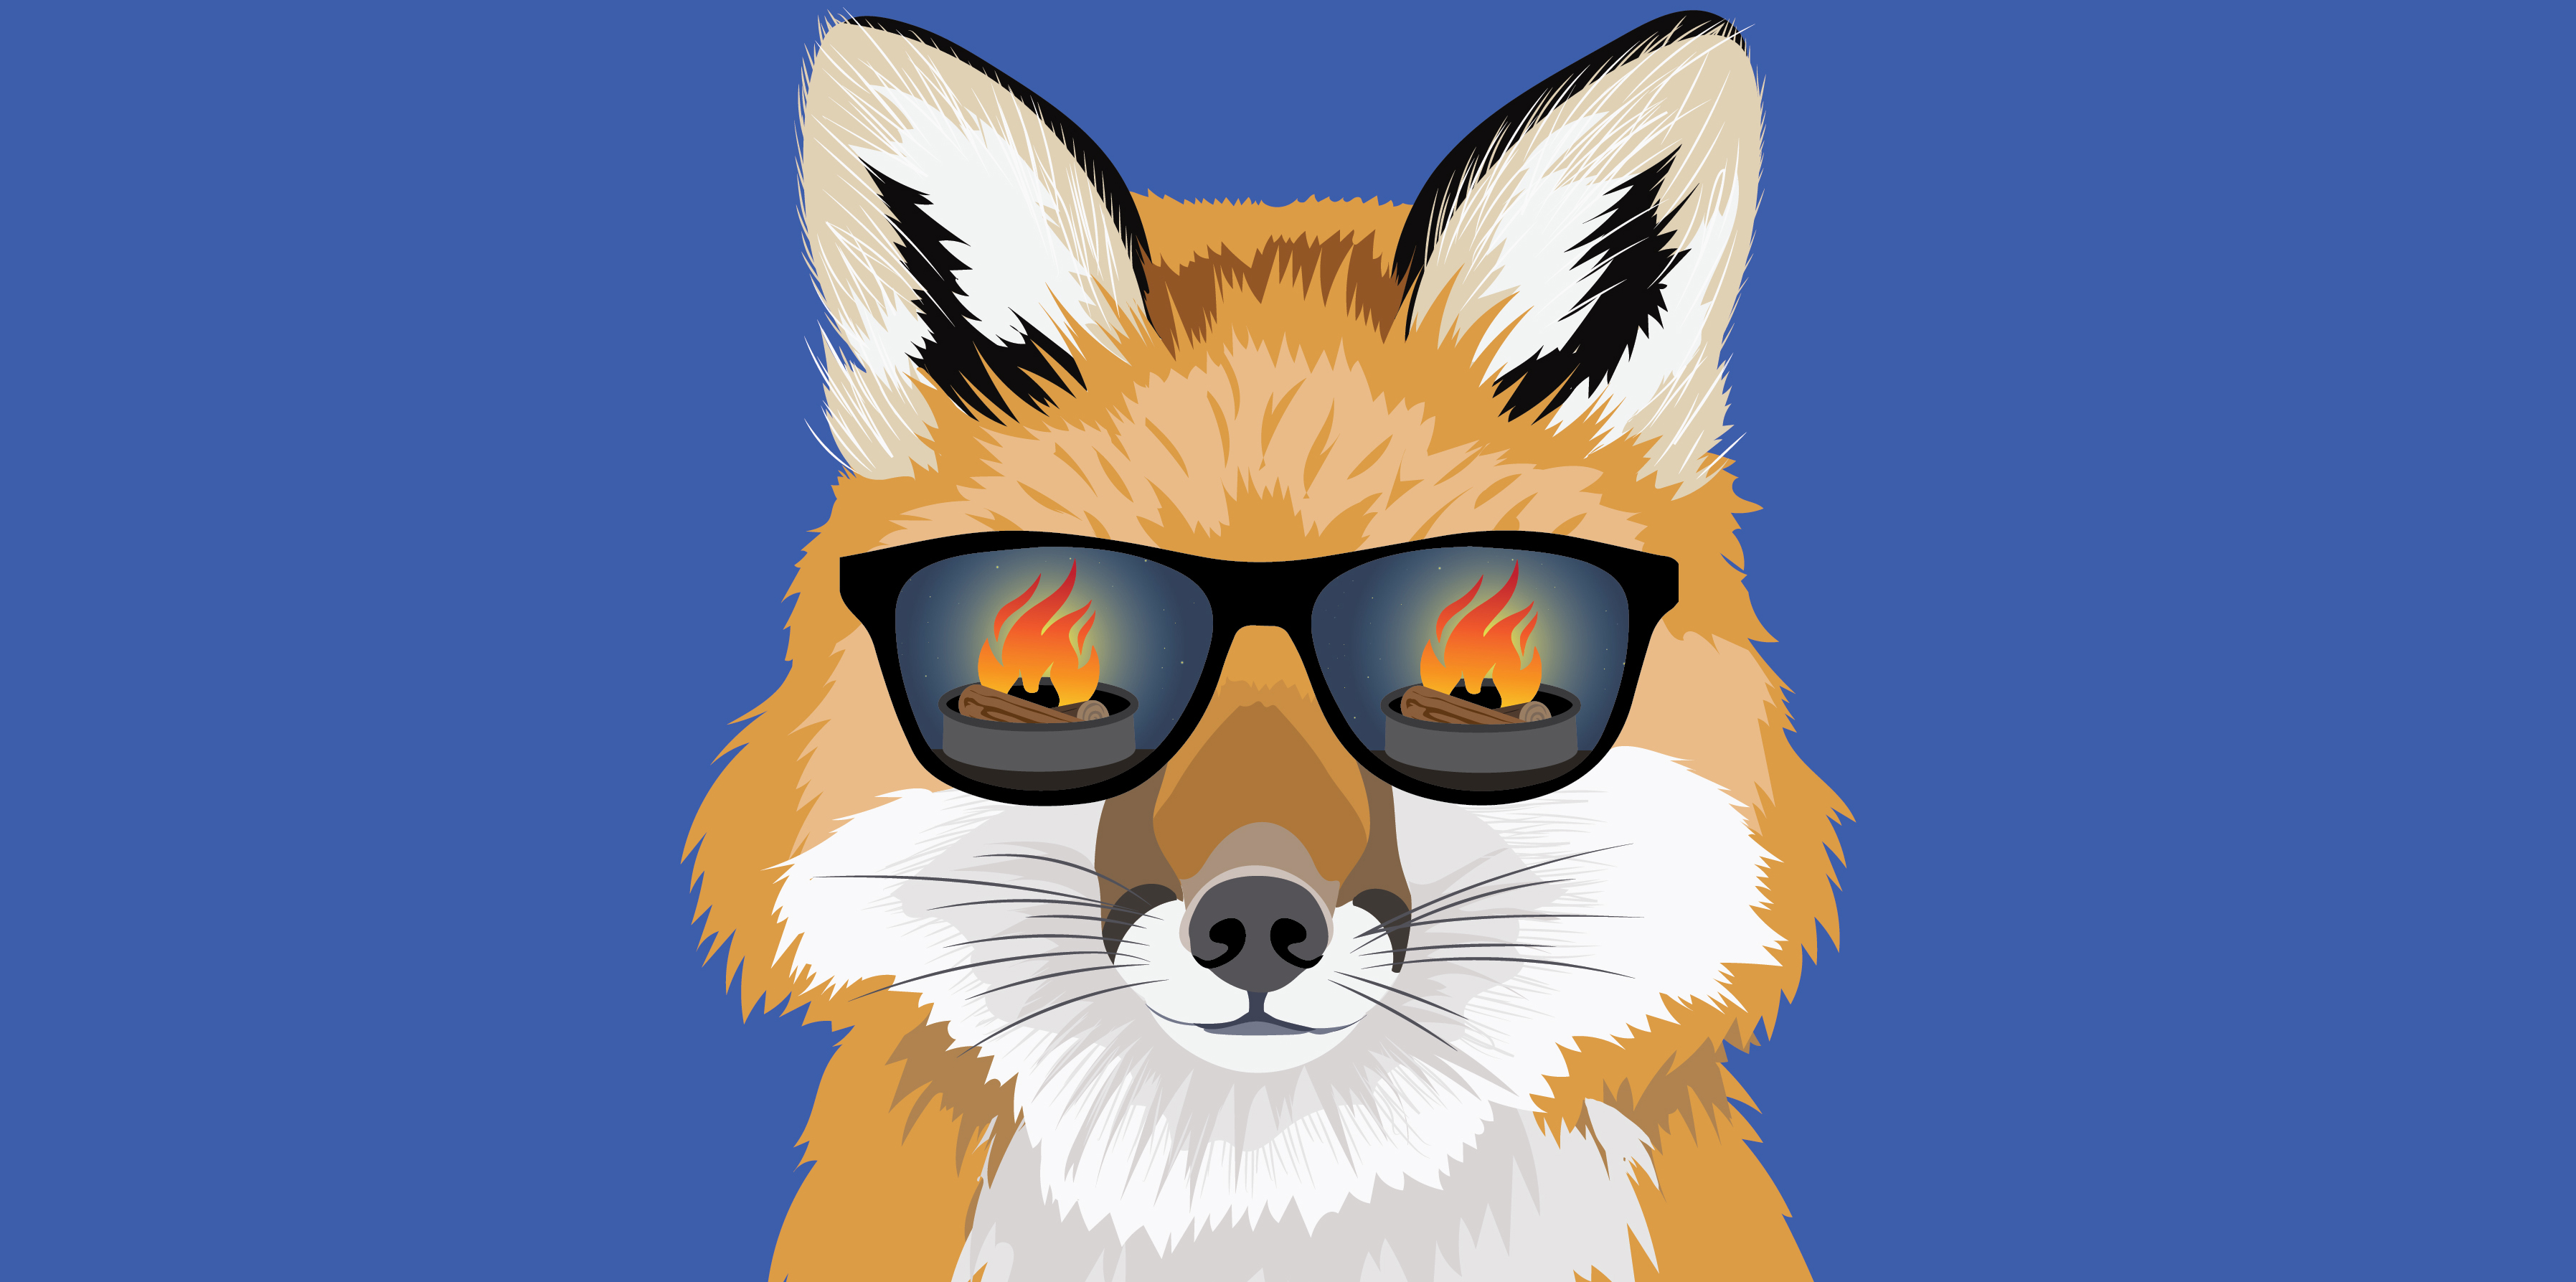 Drawing of a fox wearing sunglasses on a dark blue background. A campfire is in the reflection of the sunglasses.